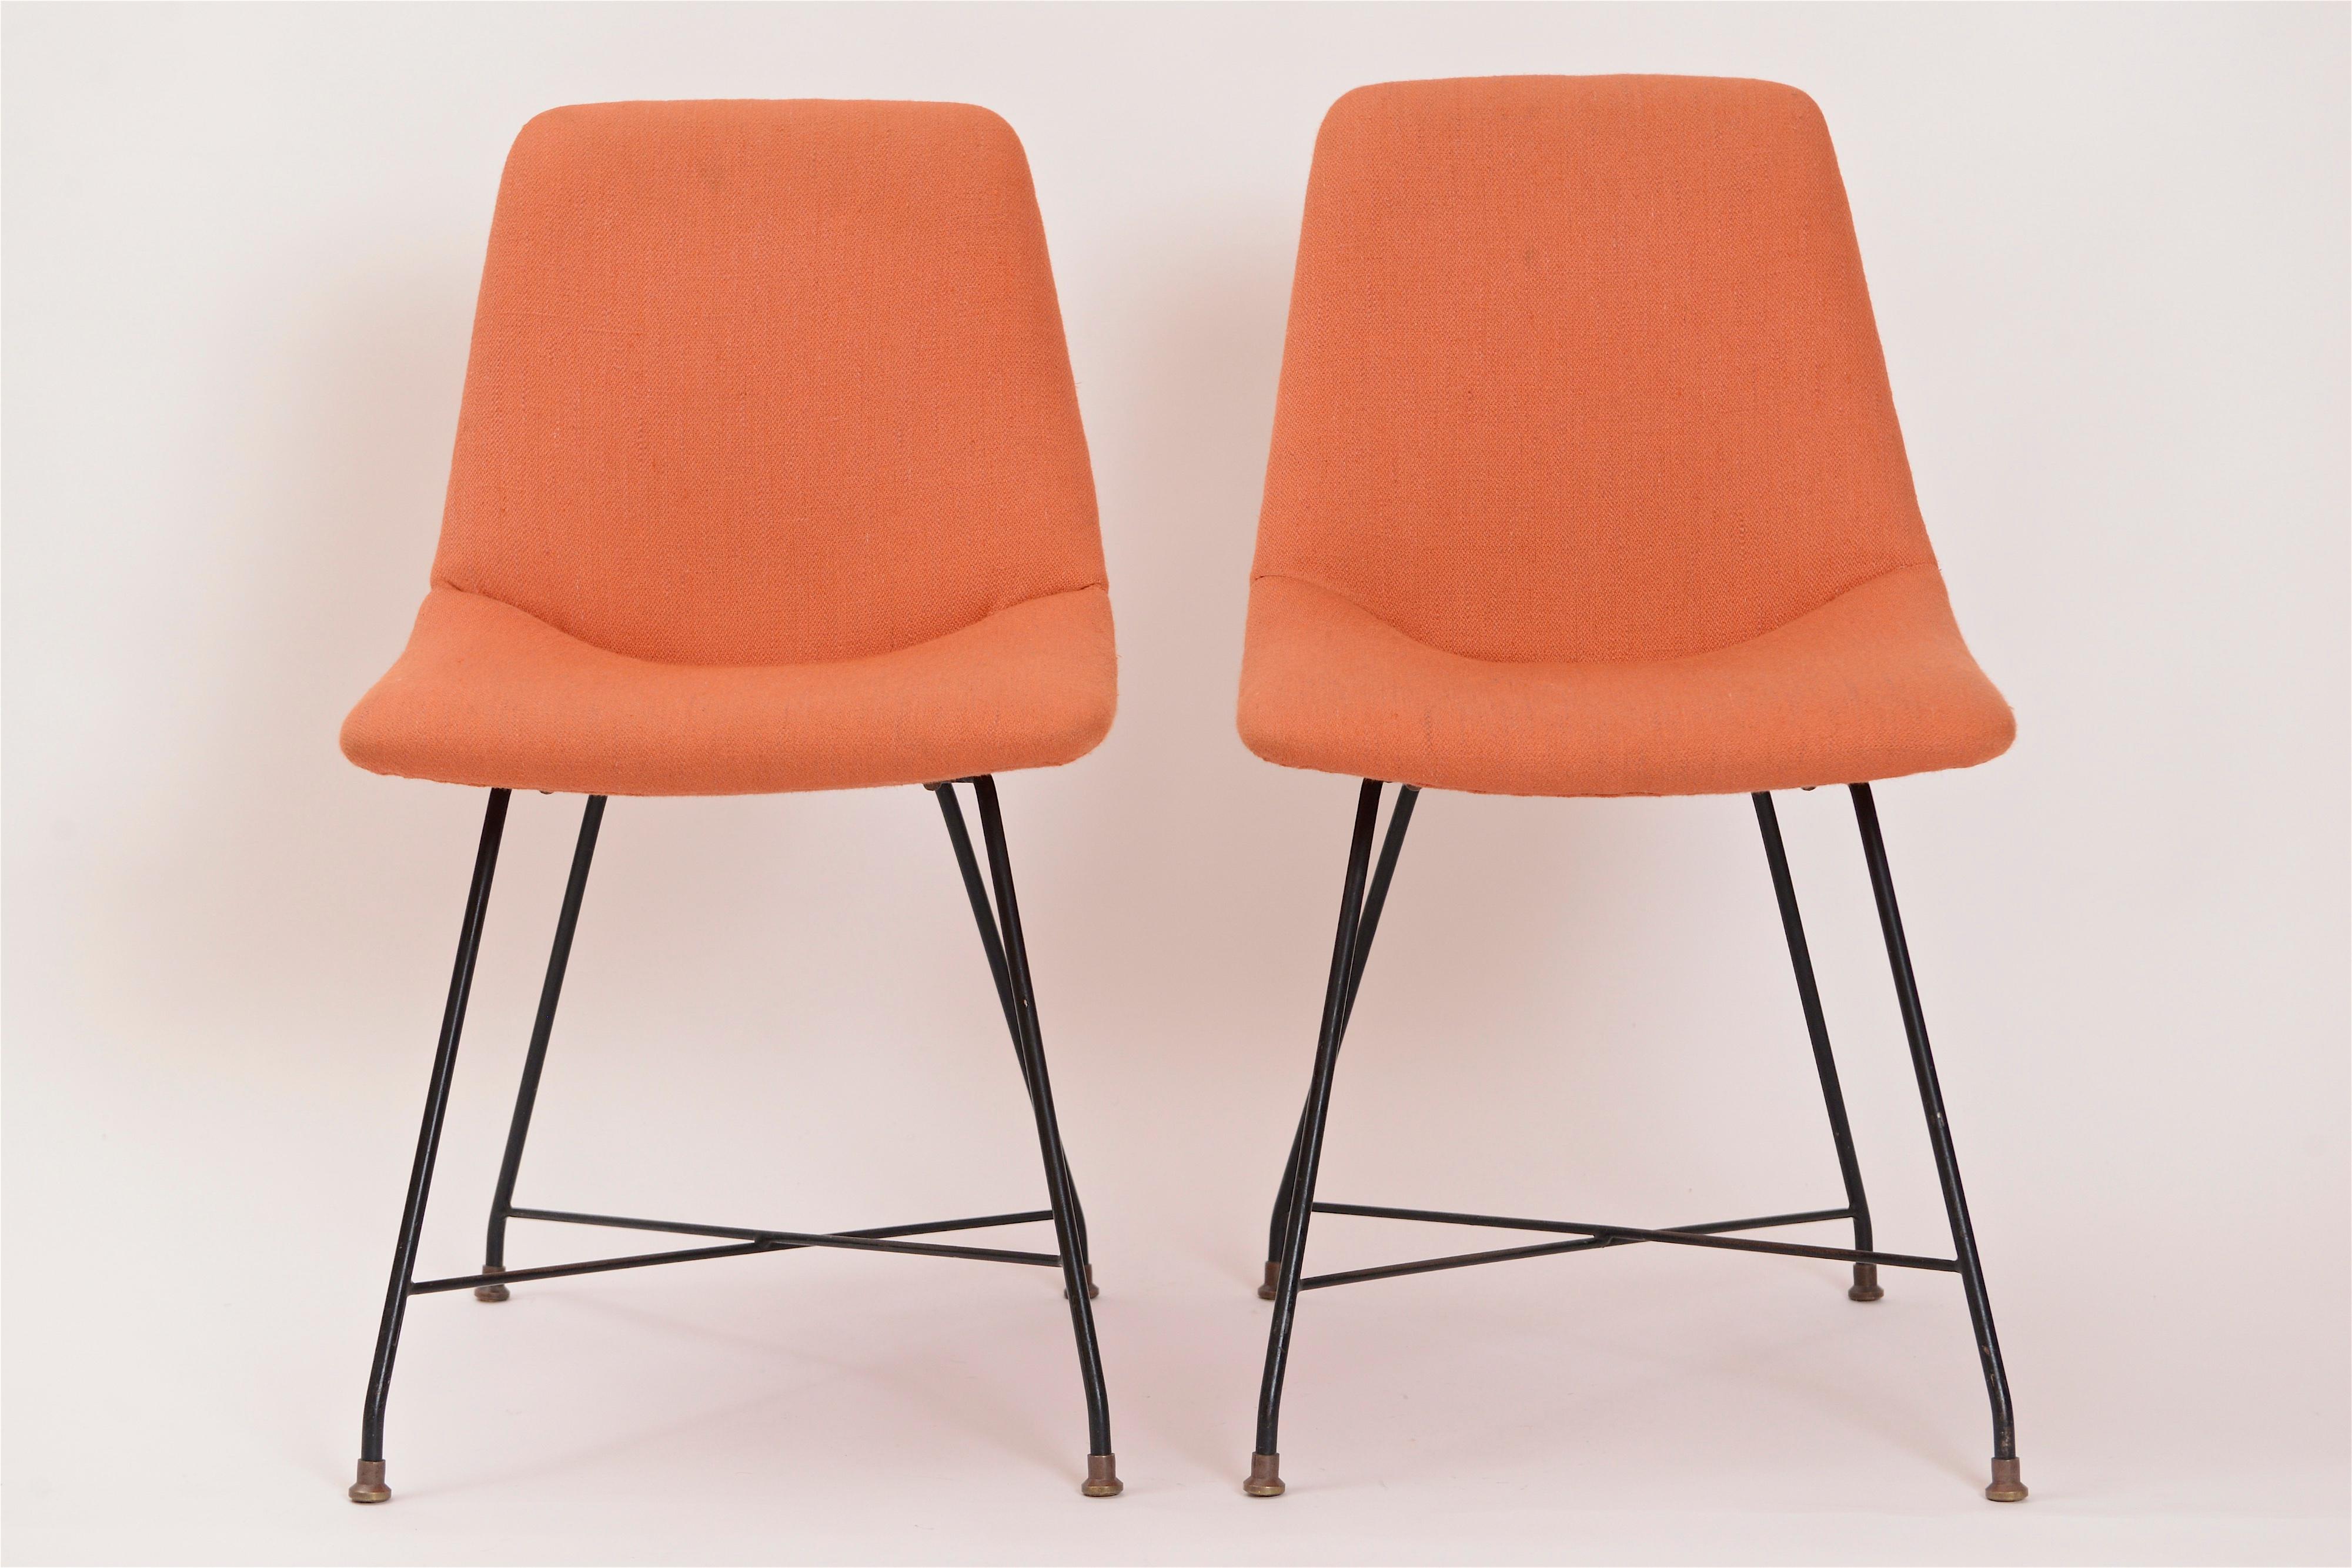 20th Century Pair of ‘Aster’ Chairs by Augusto Bozzi, Italy, circa 1956